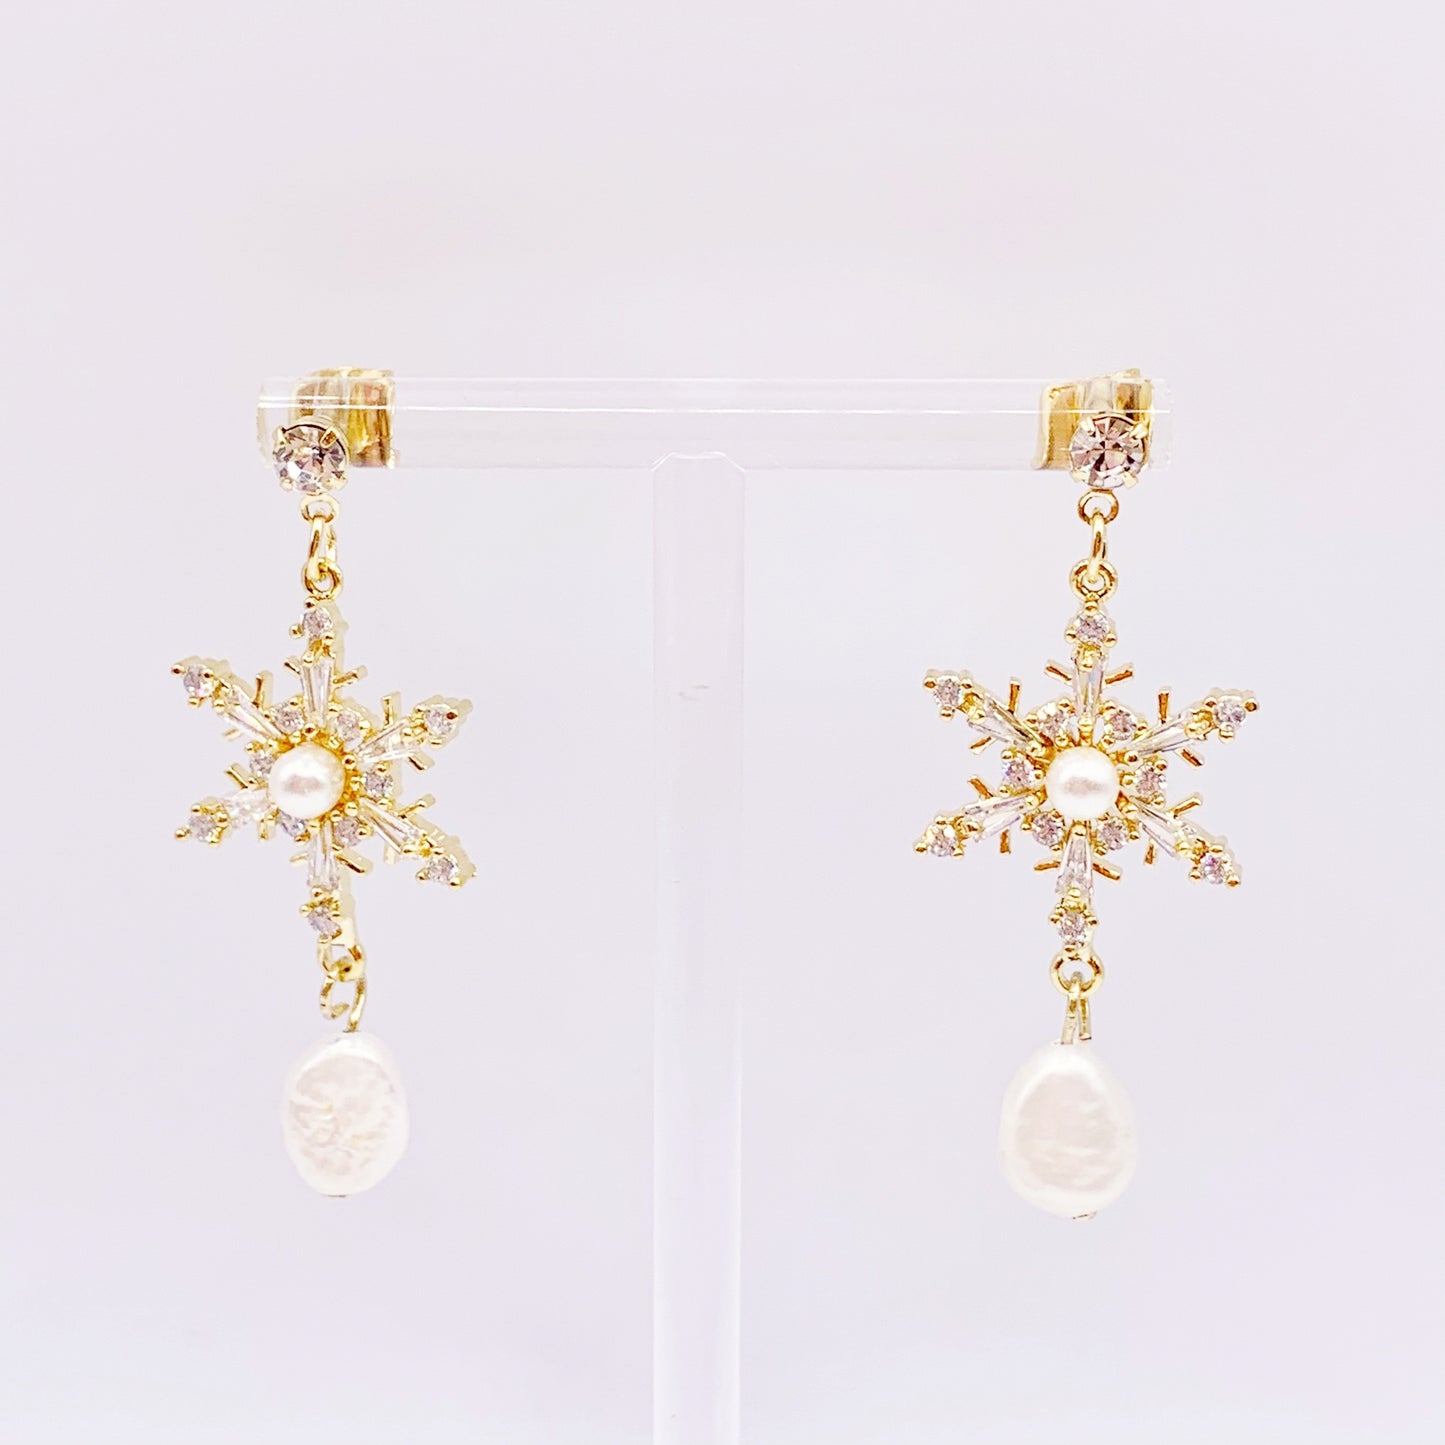 Shiny Star with Pearl Decoration Dangling Earrings